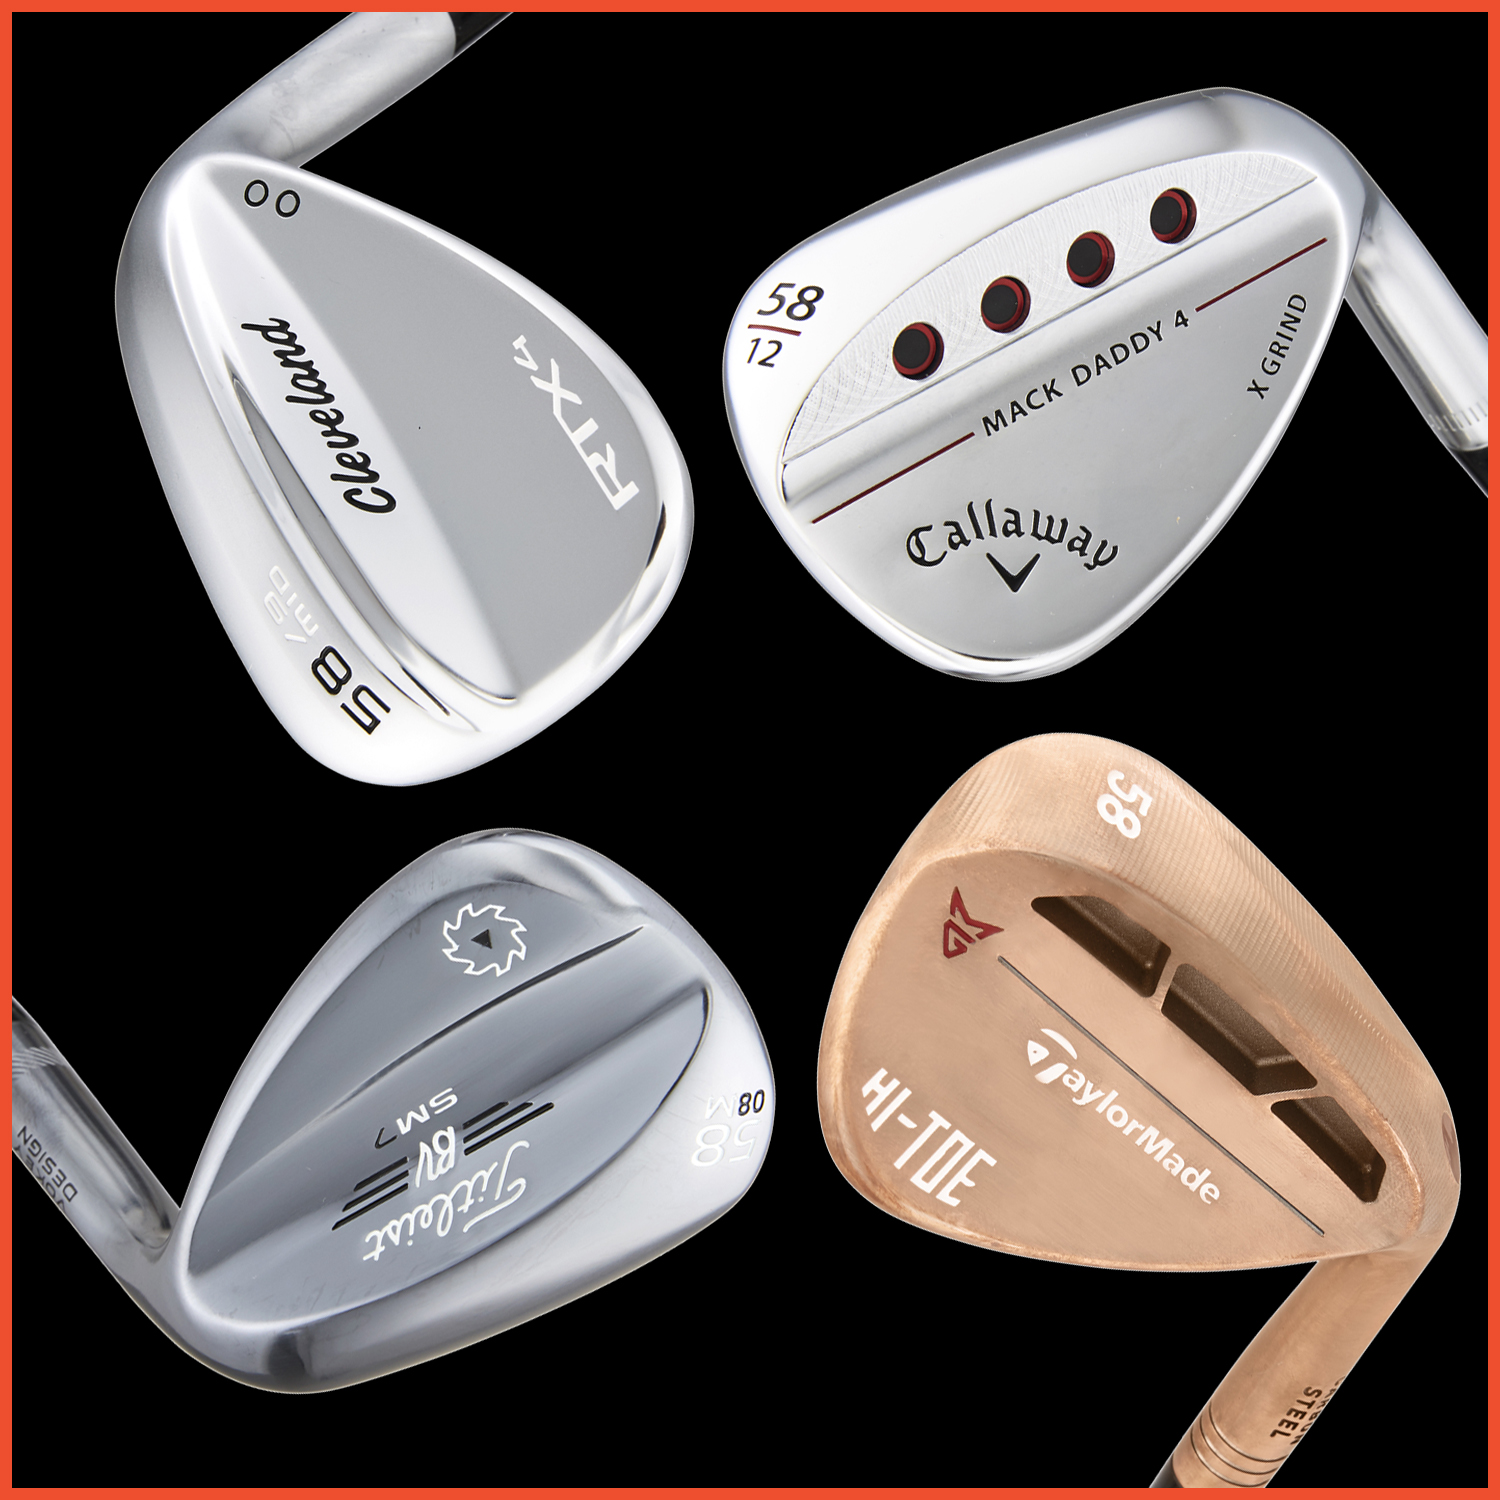 The best golf wedges of 2019: Make your 